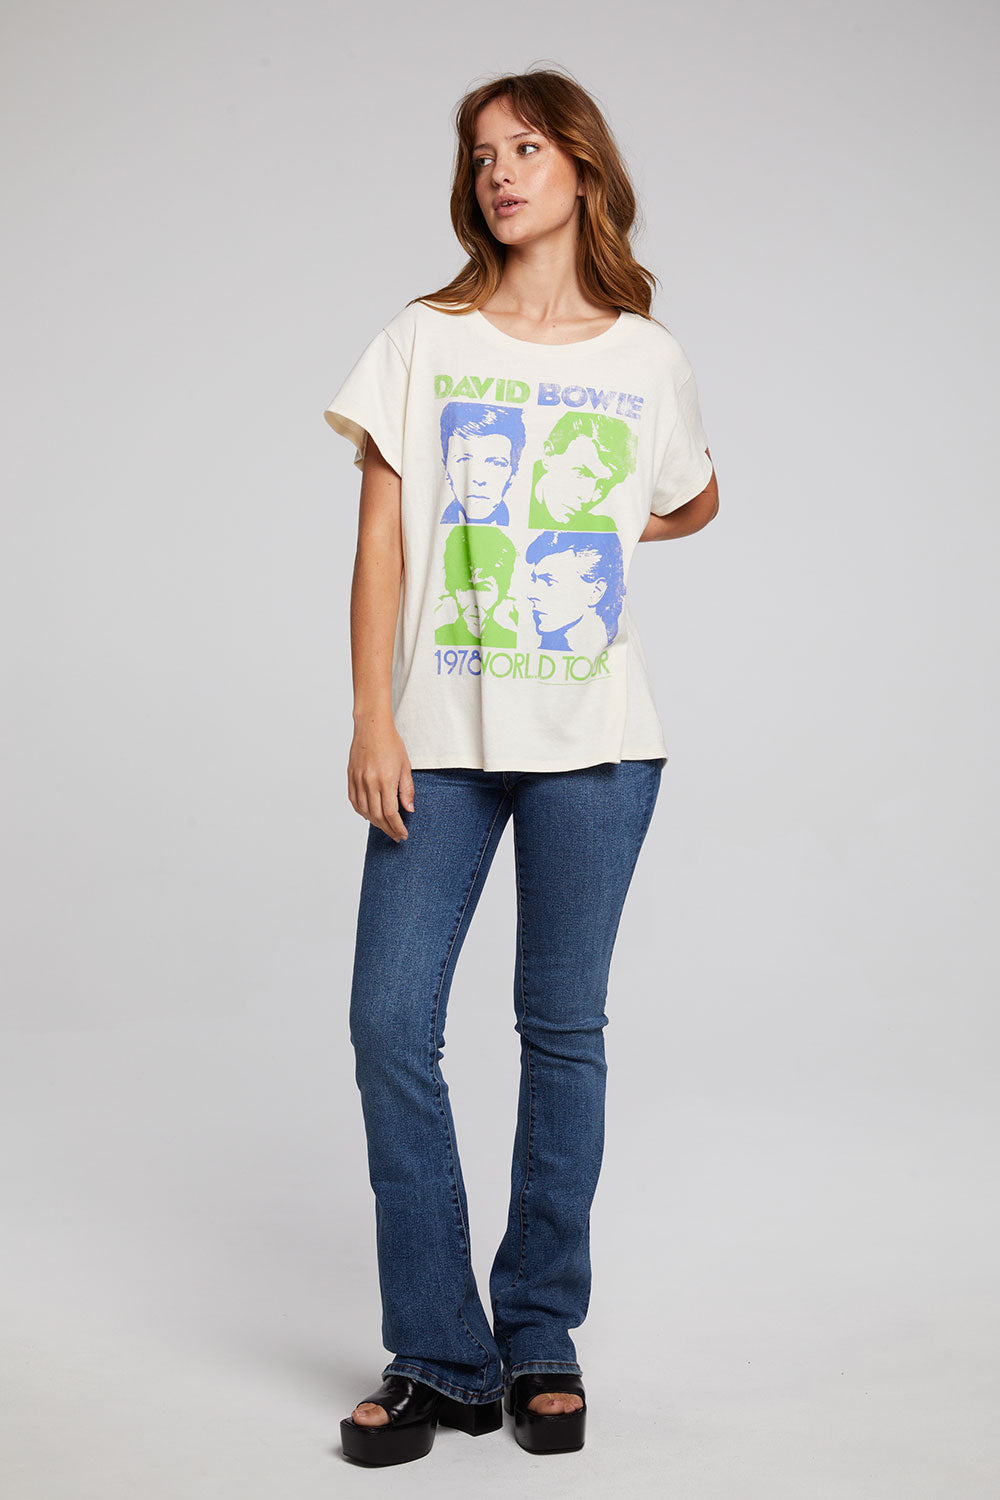 David Bowie U.S. Tour Tee WOMENS chaserbrand